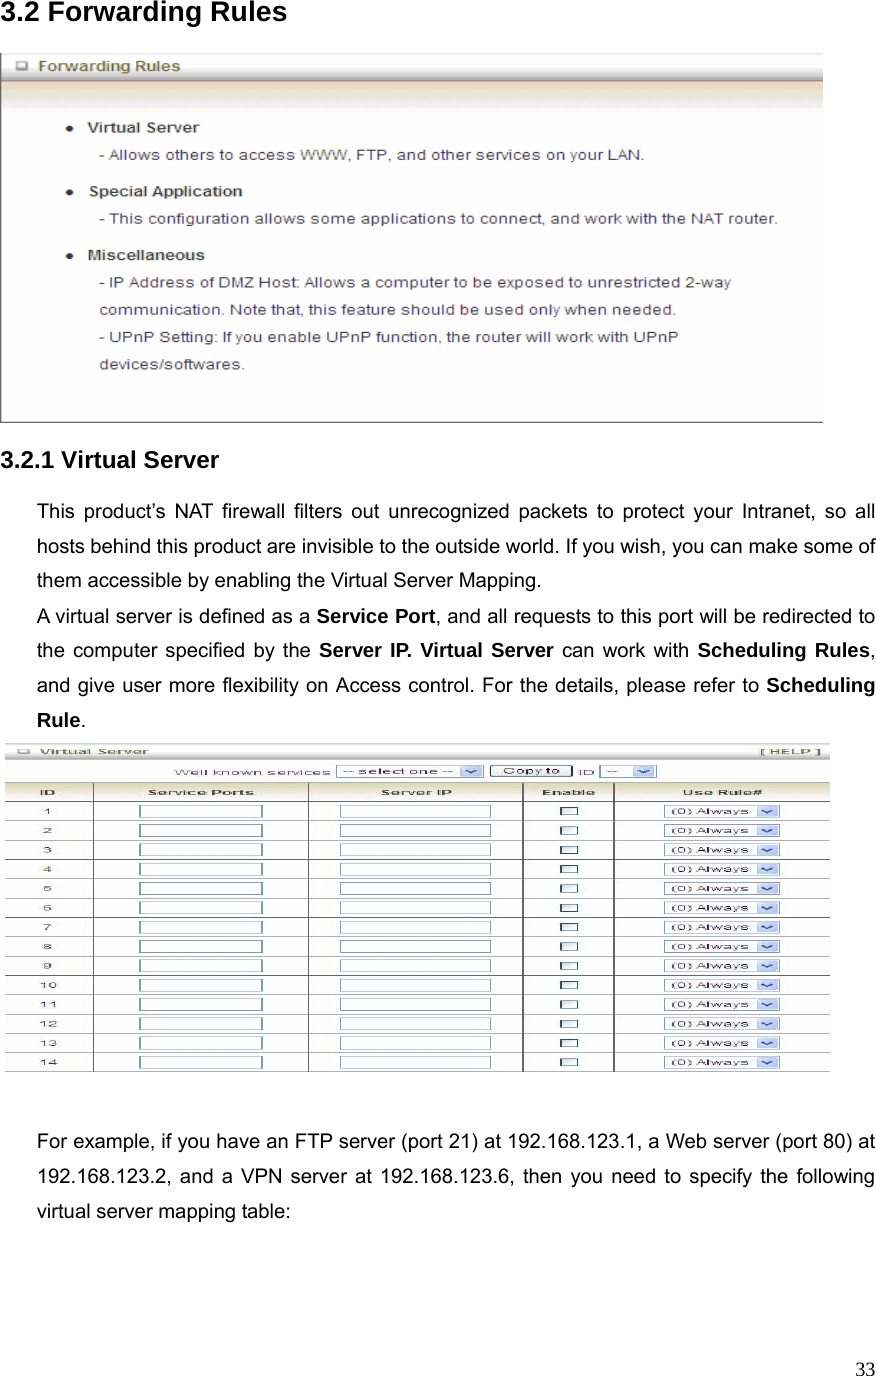  333.2 Forwarding Rules    3.2.1 Virtual Server  This product’s NAT firewall filters out unrecognized packets to protect your Intranet, so all hosts behind this product are invisible to the outside world. If you wish, you can make some of them accessible by enabling the Virtual Server Mapping. A virtual server is defined as a Service Port, and all requests to this port will be redirected to the computer specified by the Server IP. Virtual Server can work with Scheduling Rules, and give user more flexibility on Access control. For the details, please refer to Scheduling Rule.    For example, if you have an FTP server (port 21) at 192.168.123.1, a Web server (port 80) at 192.168.123.2, and a VPN server at 192.168.123.6, then you need to specify the following virtual server mapping table:   